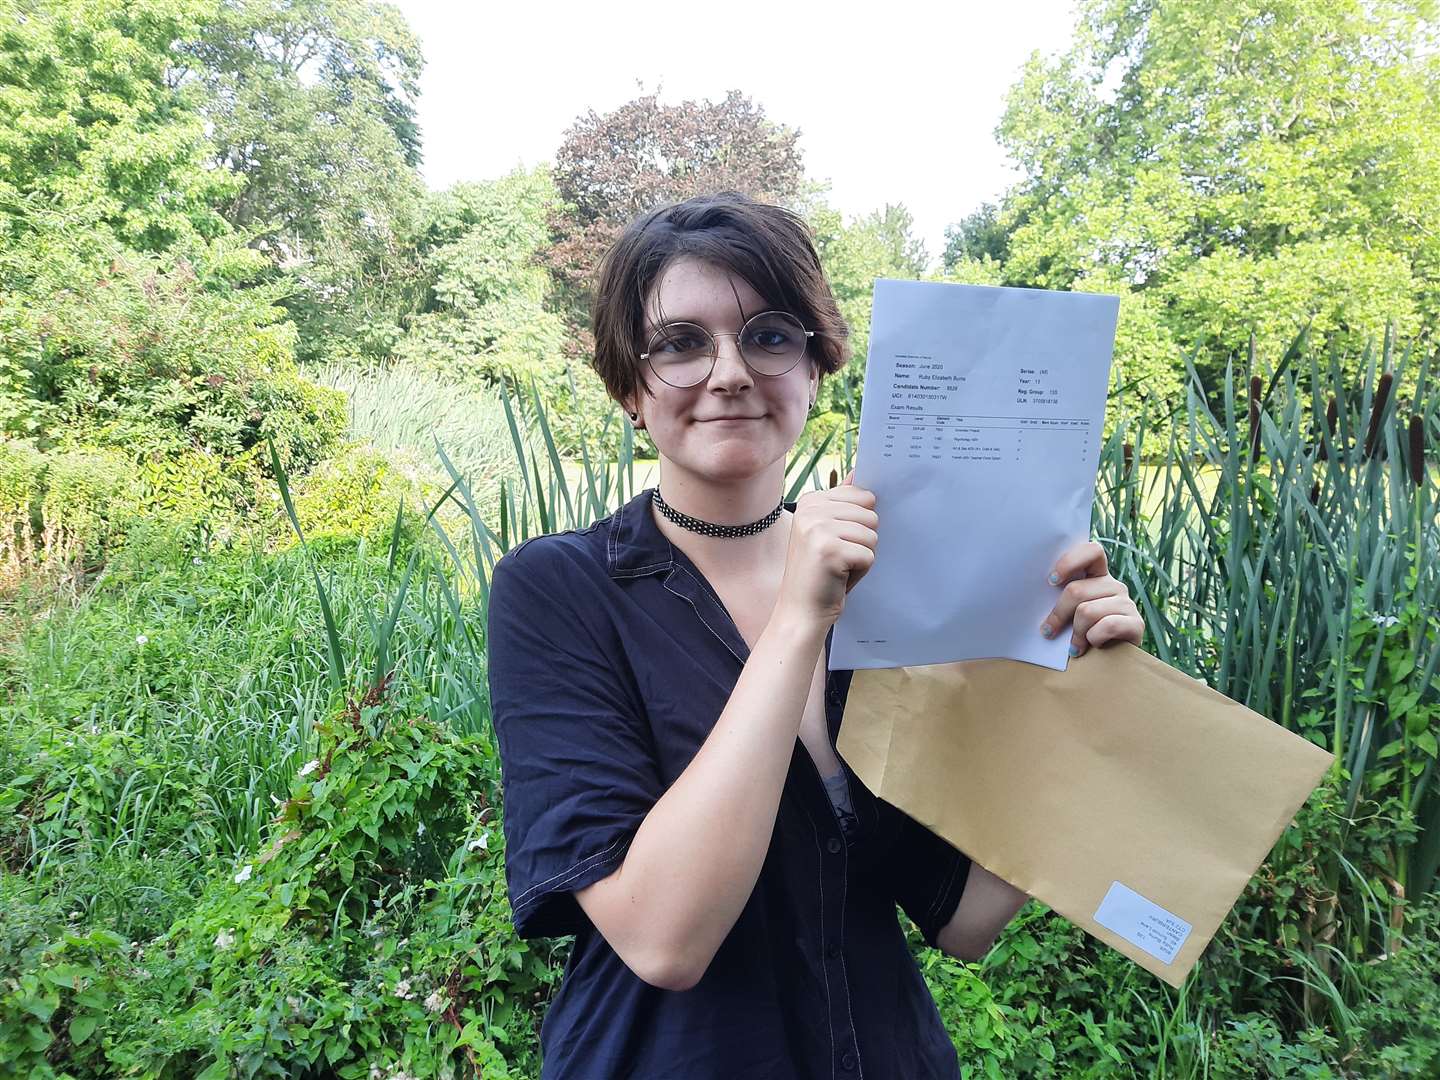 Ruby Burns, from Barton Court, will be studying fine art at Bath Spa University after being awarded an A* and three As (40414408)